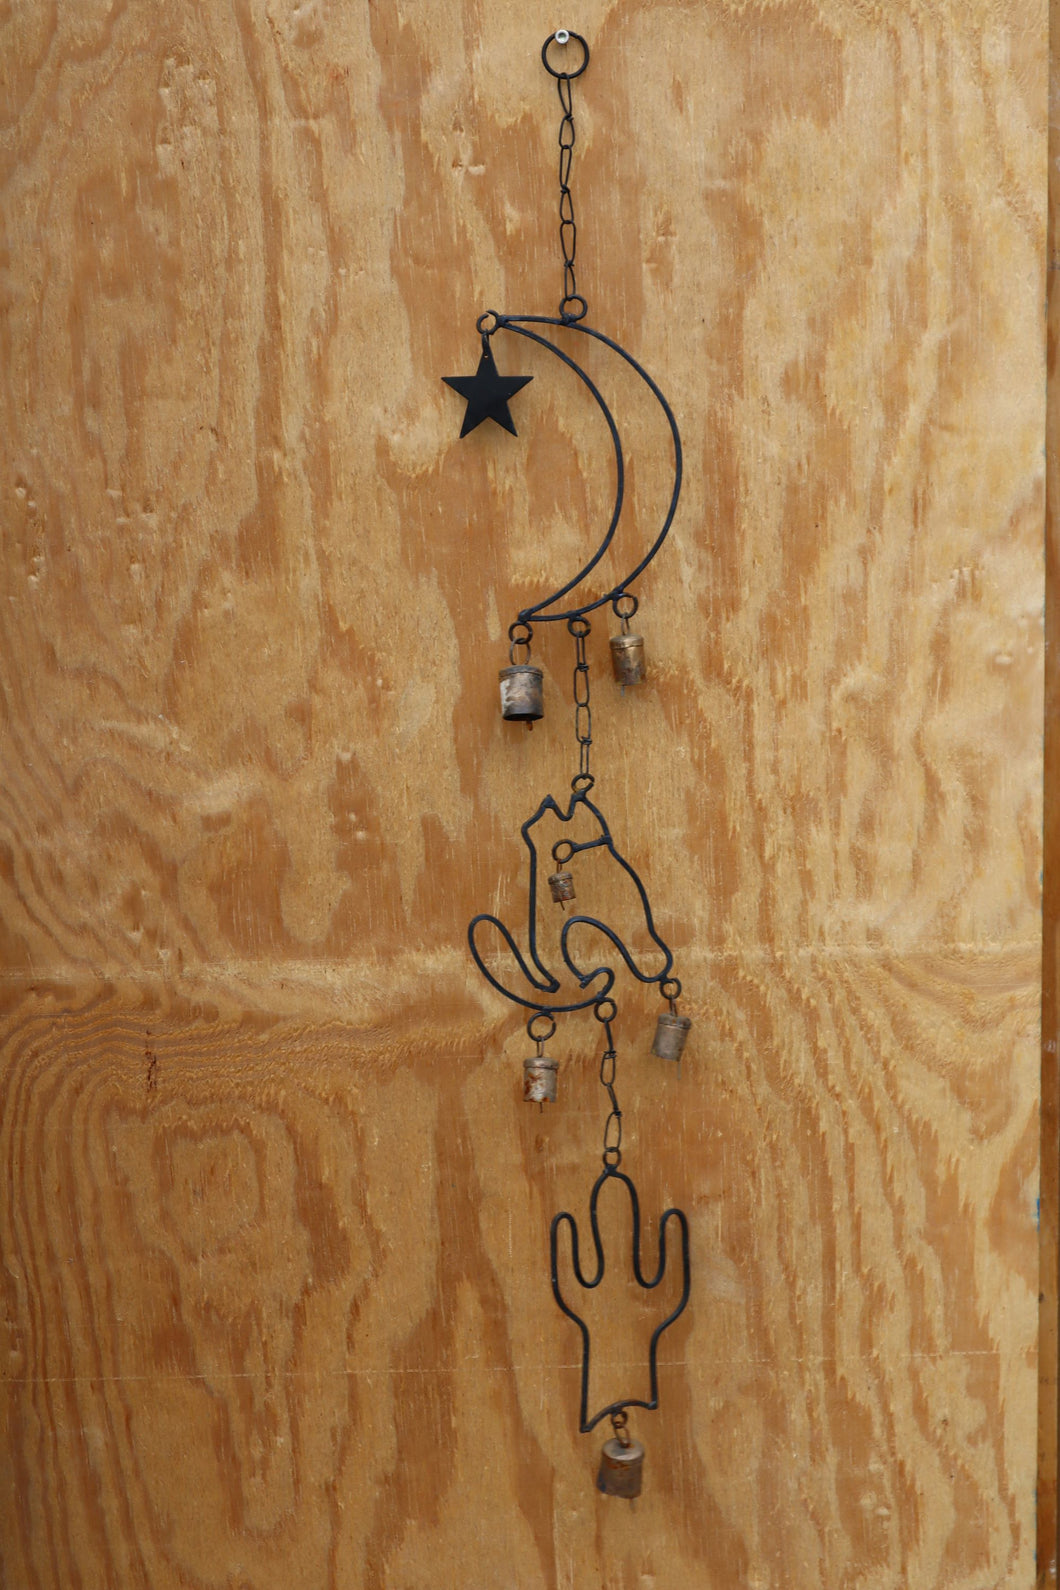 Desert Coyote Howling at The Moon Wind Chime